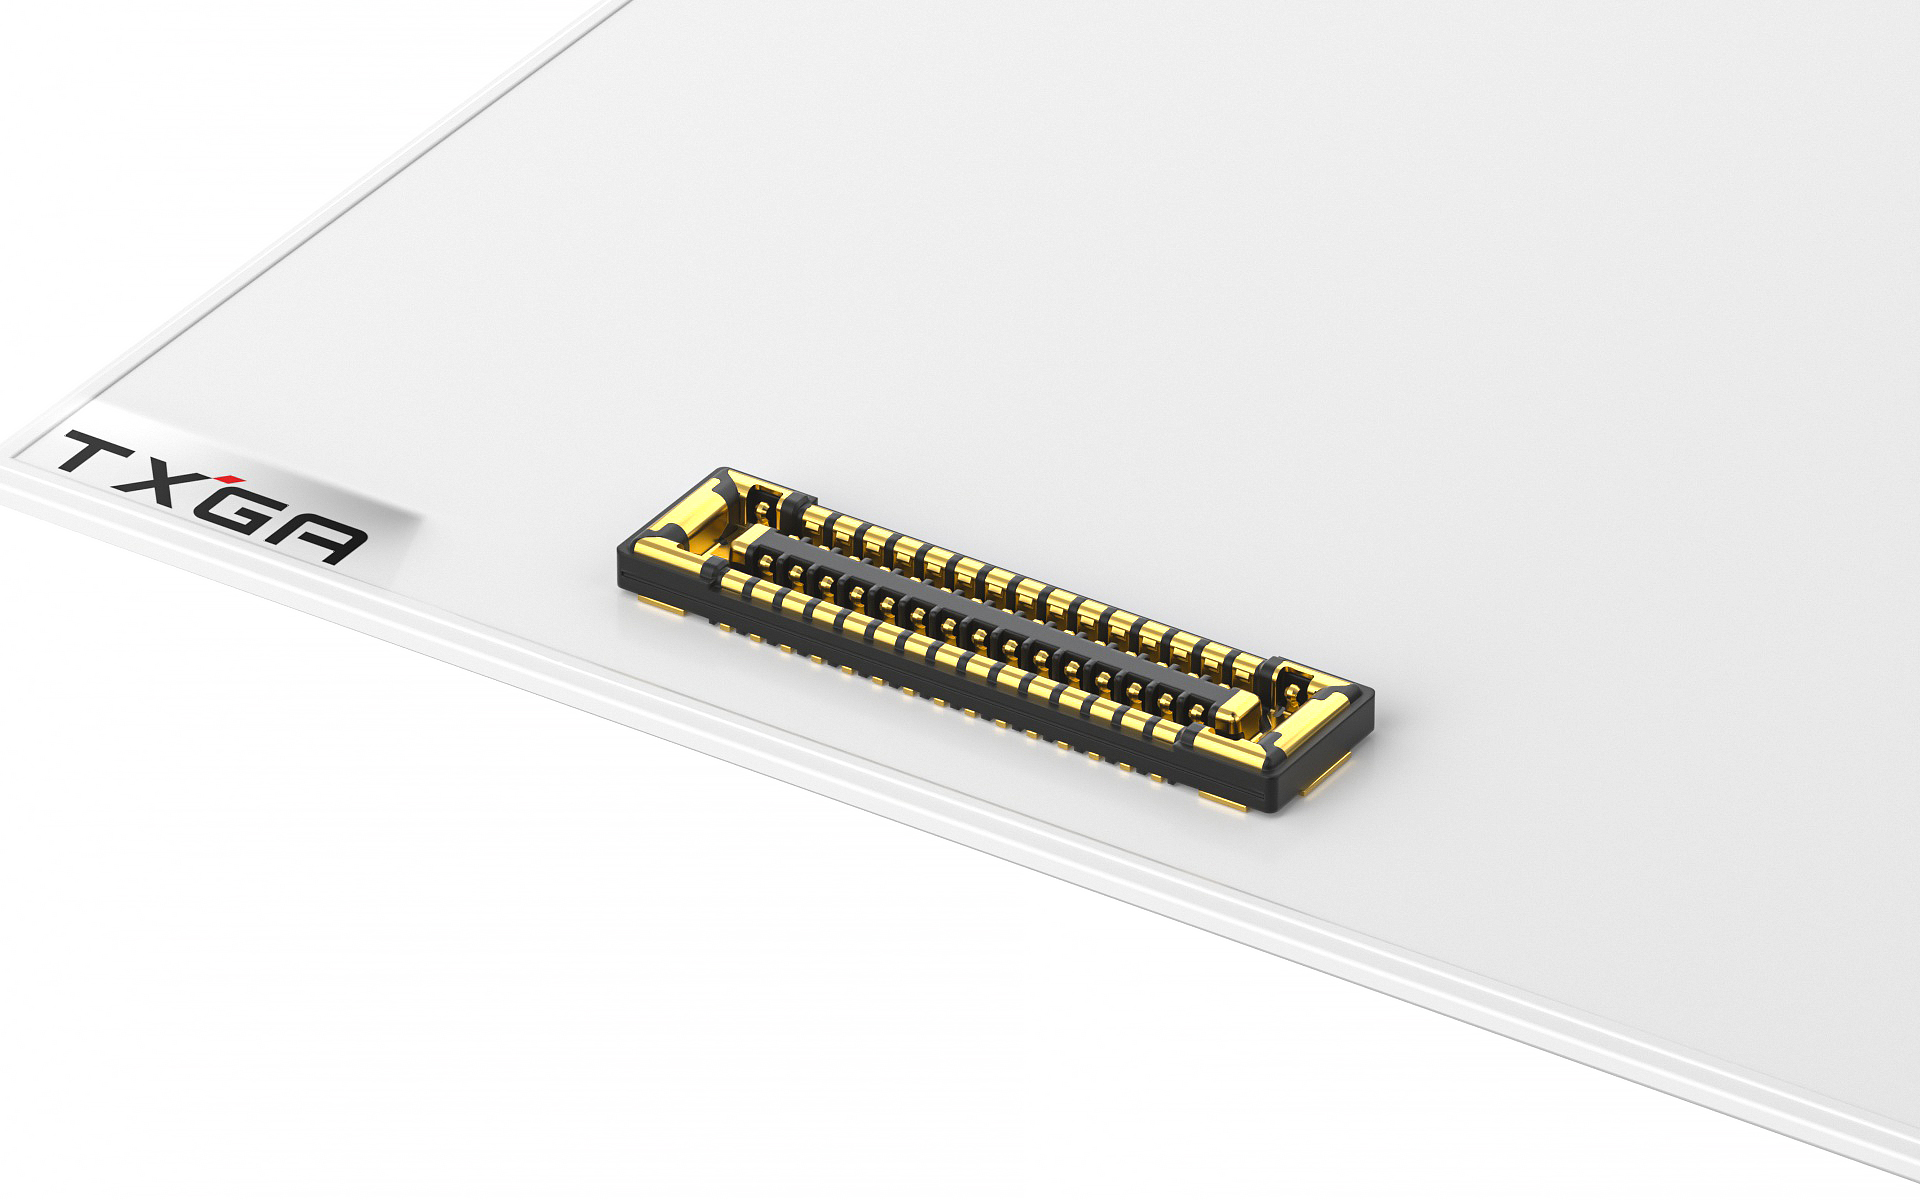 Board to Board Connector,0.35mm,Female,24Circuits,Vertical(180°),SMT, (Mated height 0.6mm)